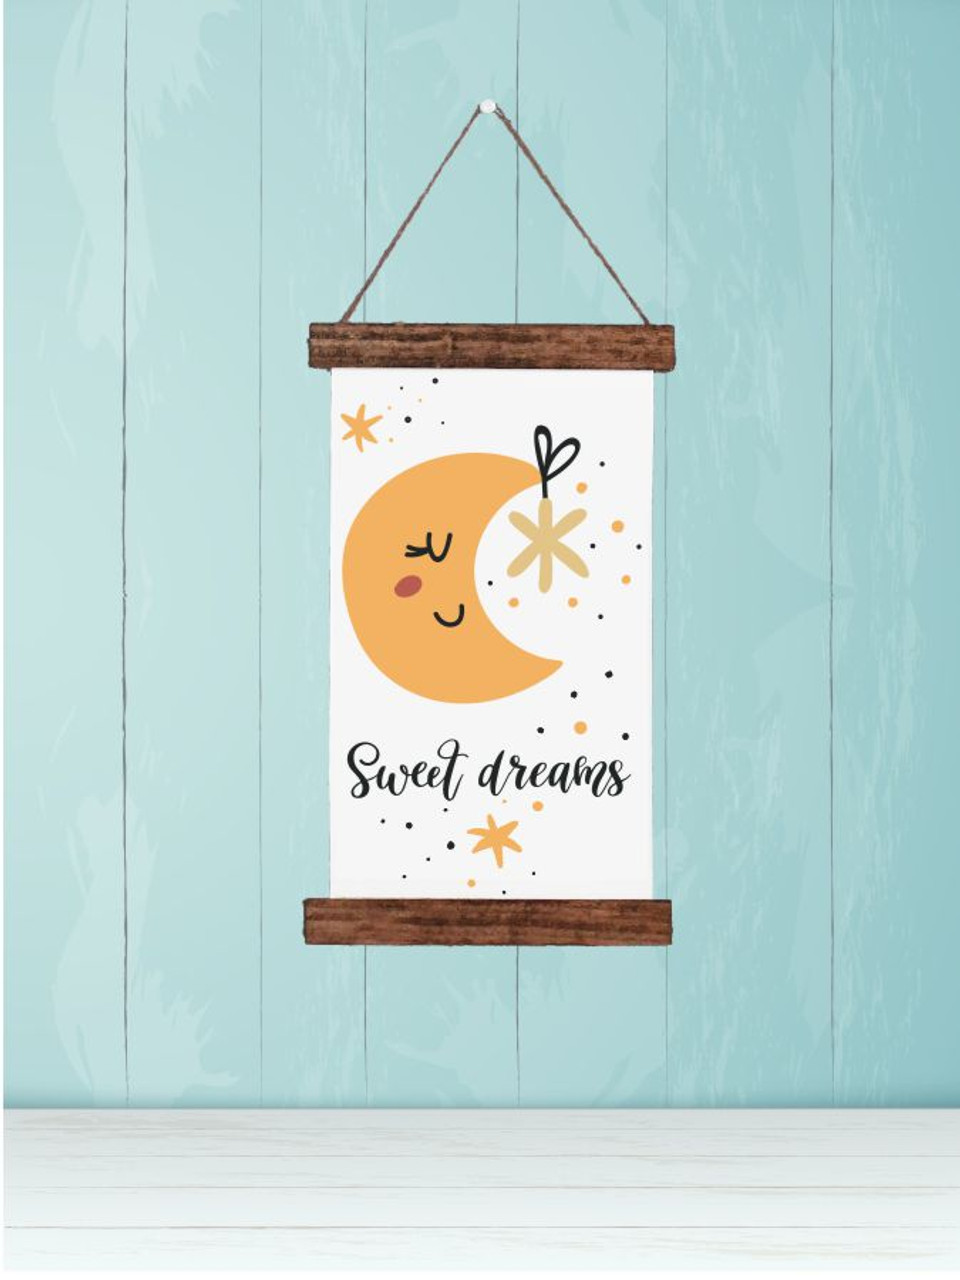 https://cdn11.bigcommerce.com/s-571px4/images/stencil/1280x1280/products/3722/18788/CWH0283_Canvas_Wall_Hanging_Kids_Bedroom_Nursery_Sweet_Dreams_Moon_Stars_Wall_Decor_Art_9x15_small_main__01229.1642649796.jpg?c=2